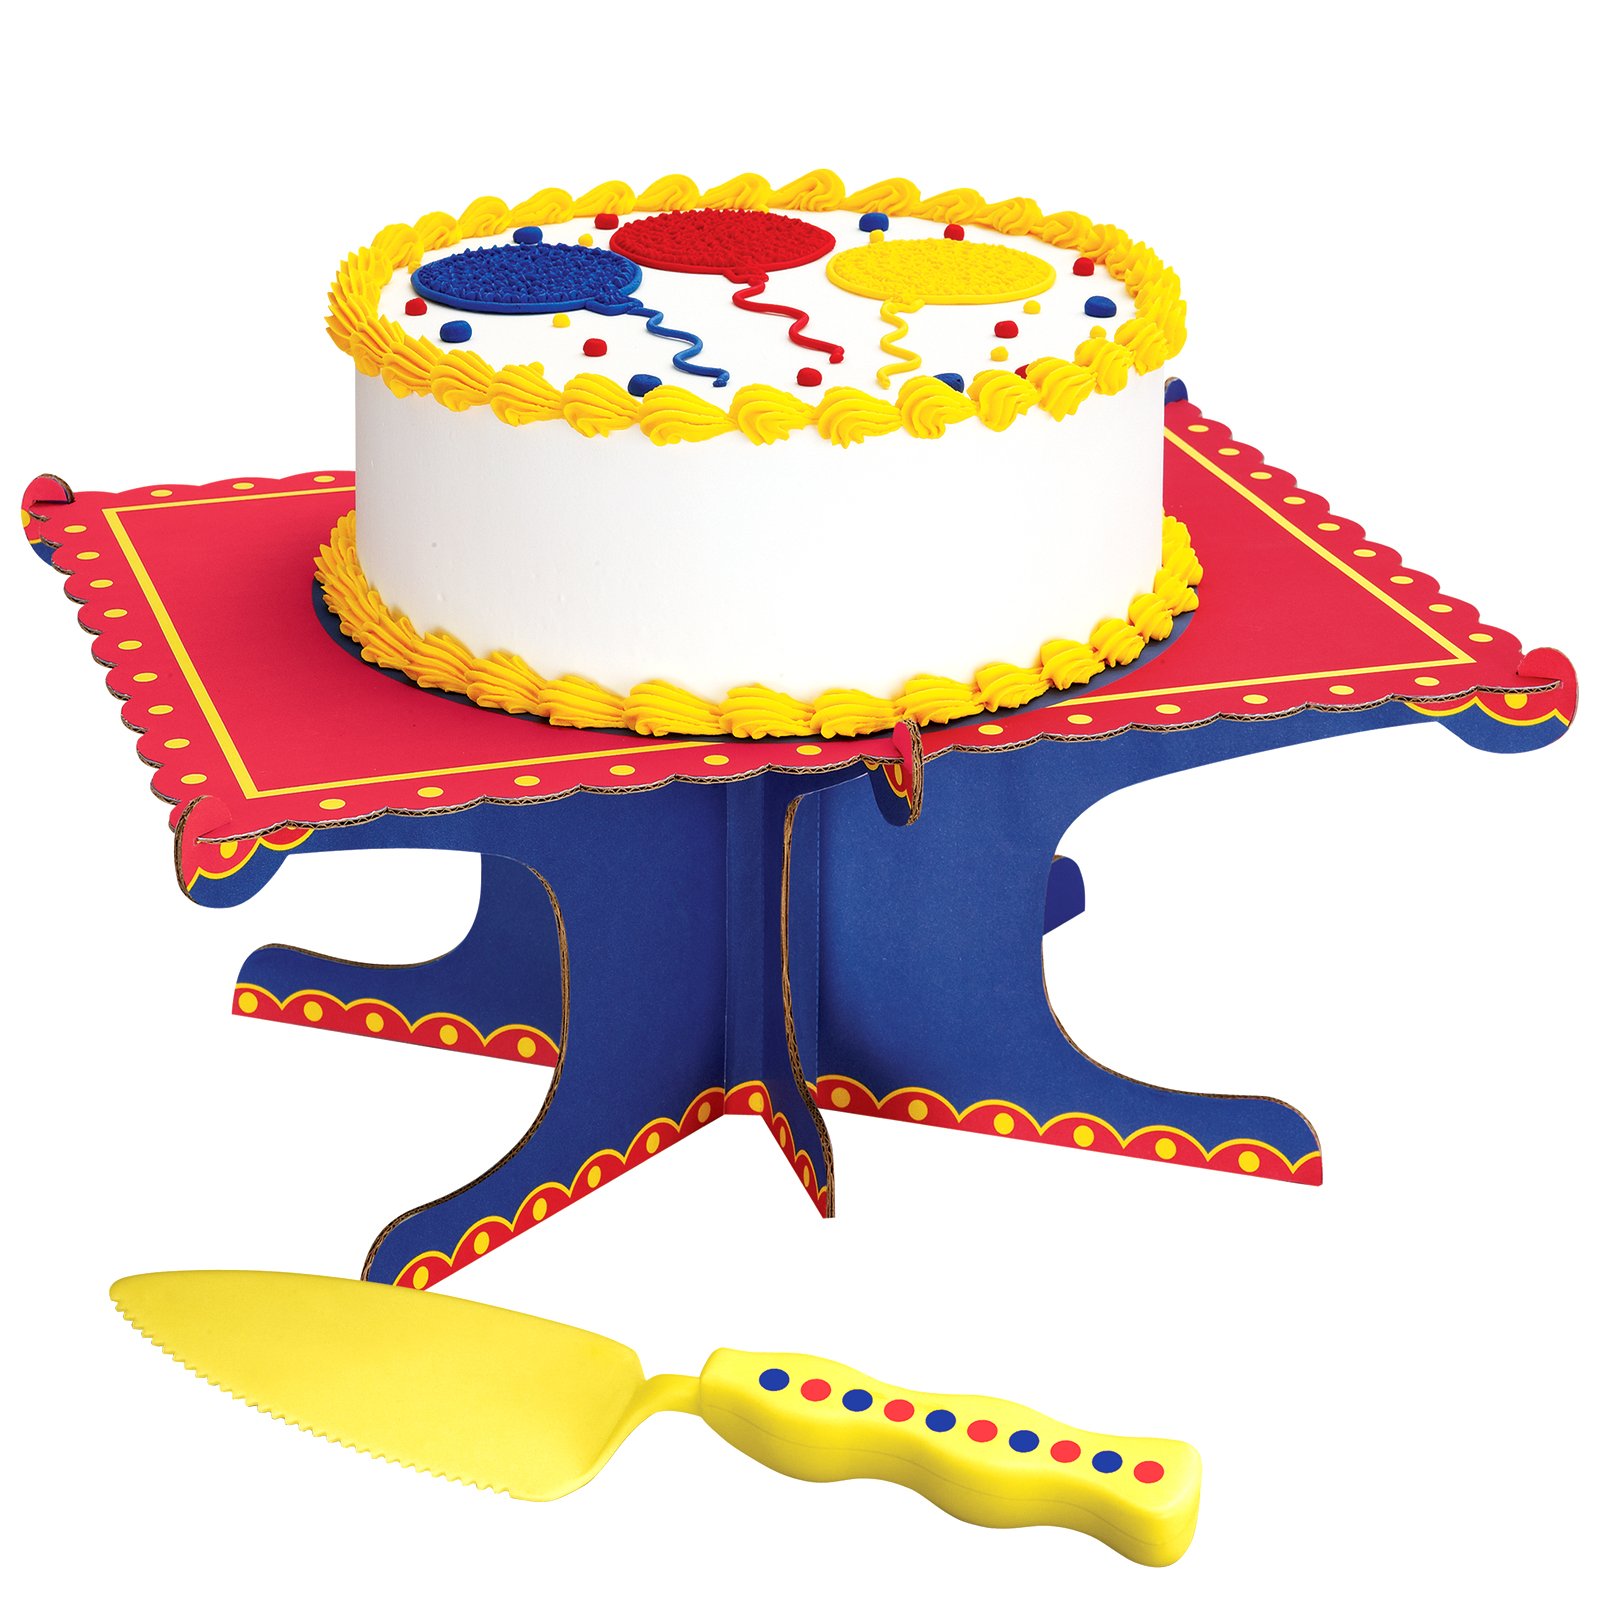 Primary Colors Cake Stand Kit